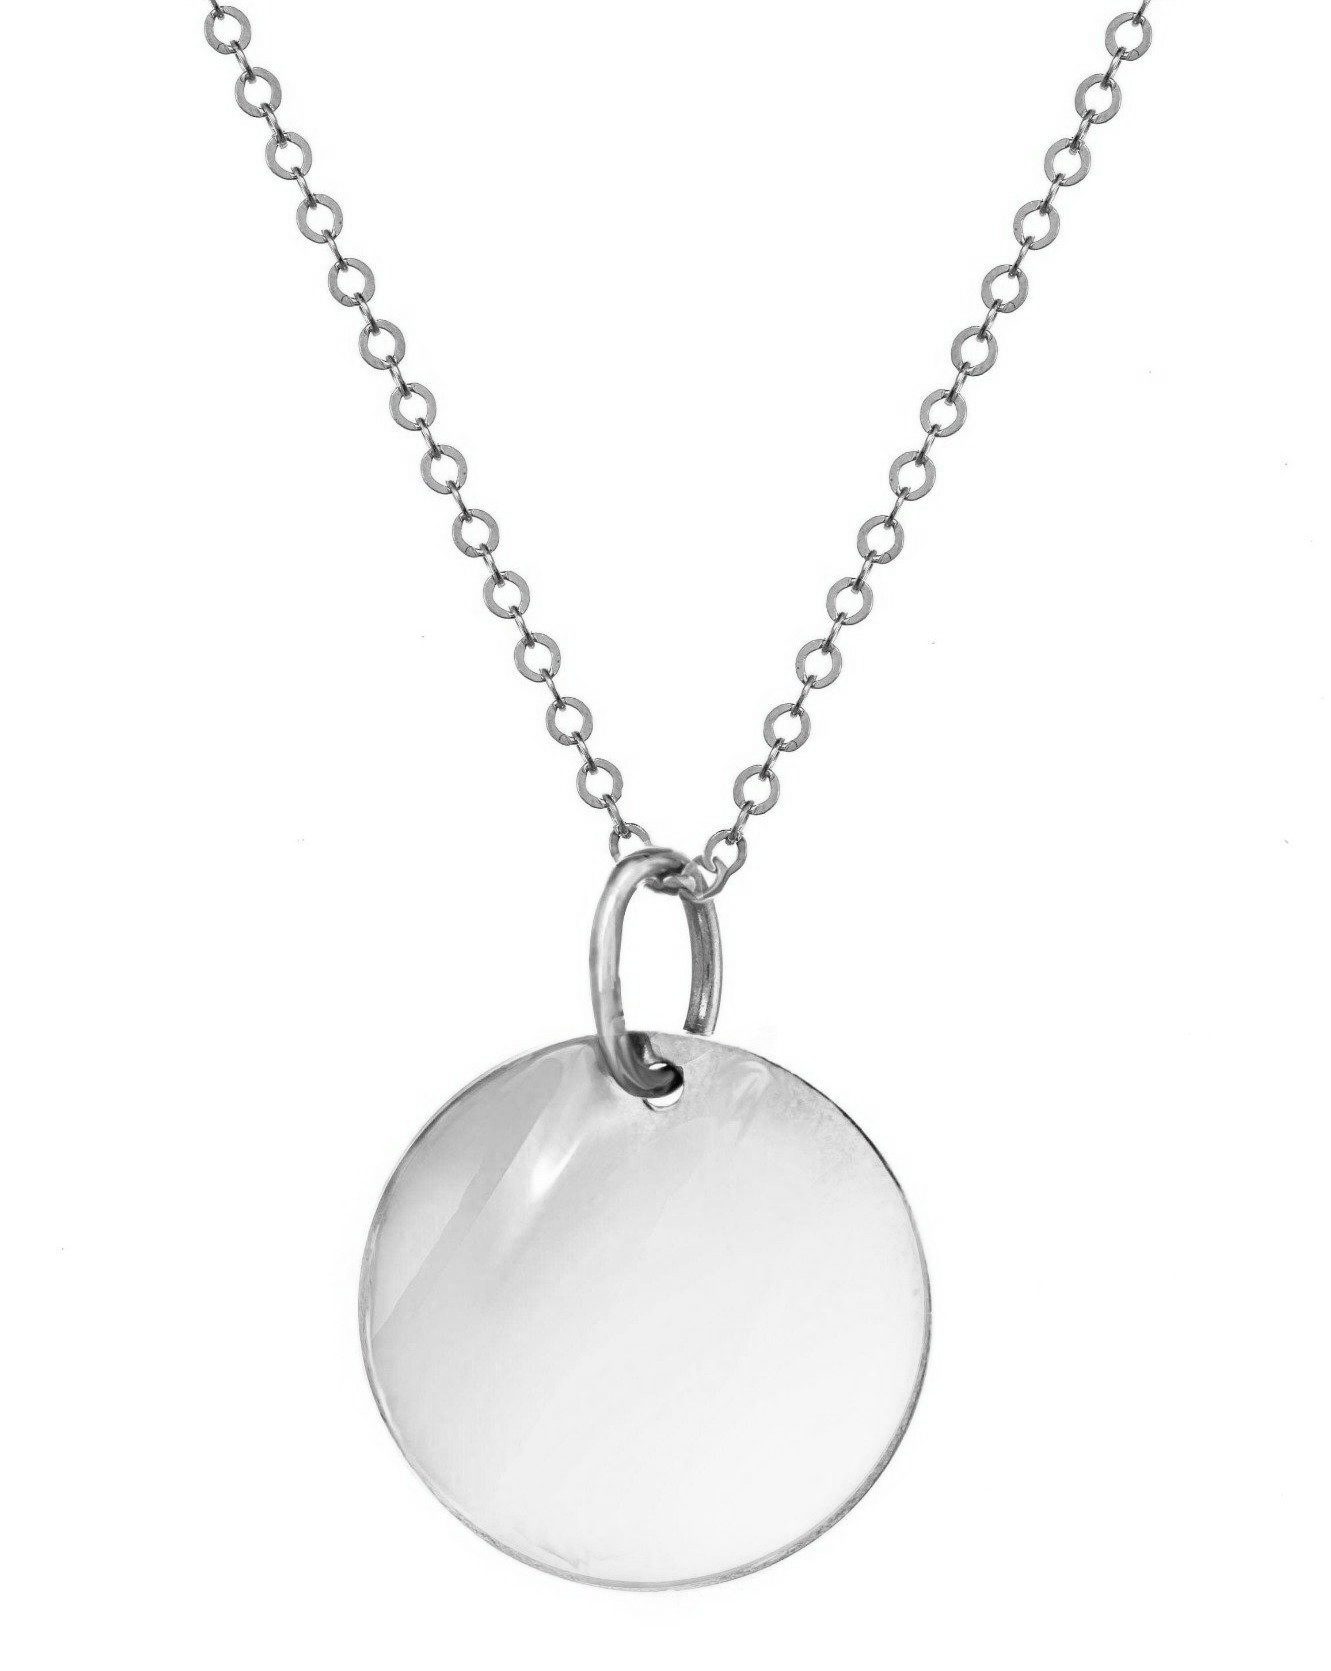 Chloe Necklace by KOZAKH. A 16 inch long Rollo chain necklace in Sterling Silver, featuring a 16mm Coin medallion.